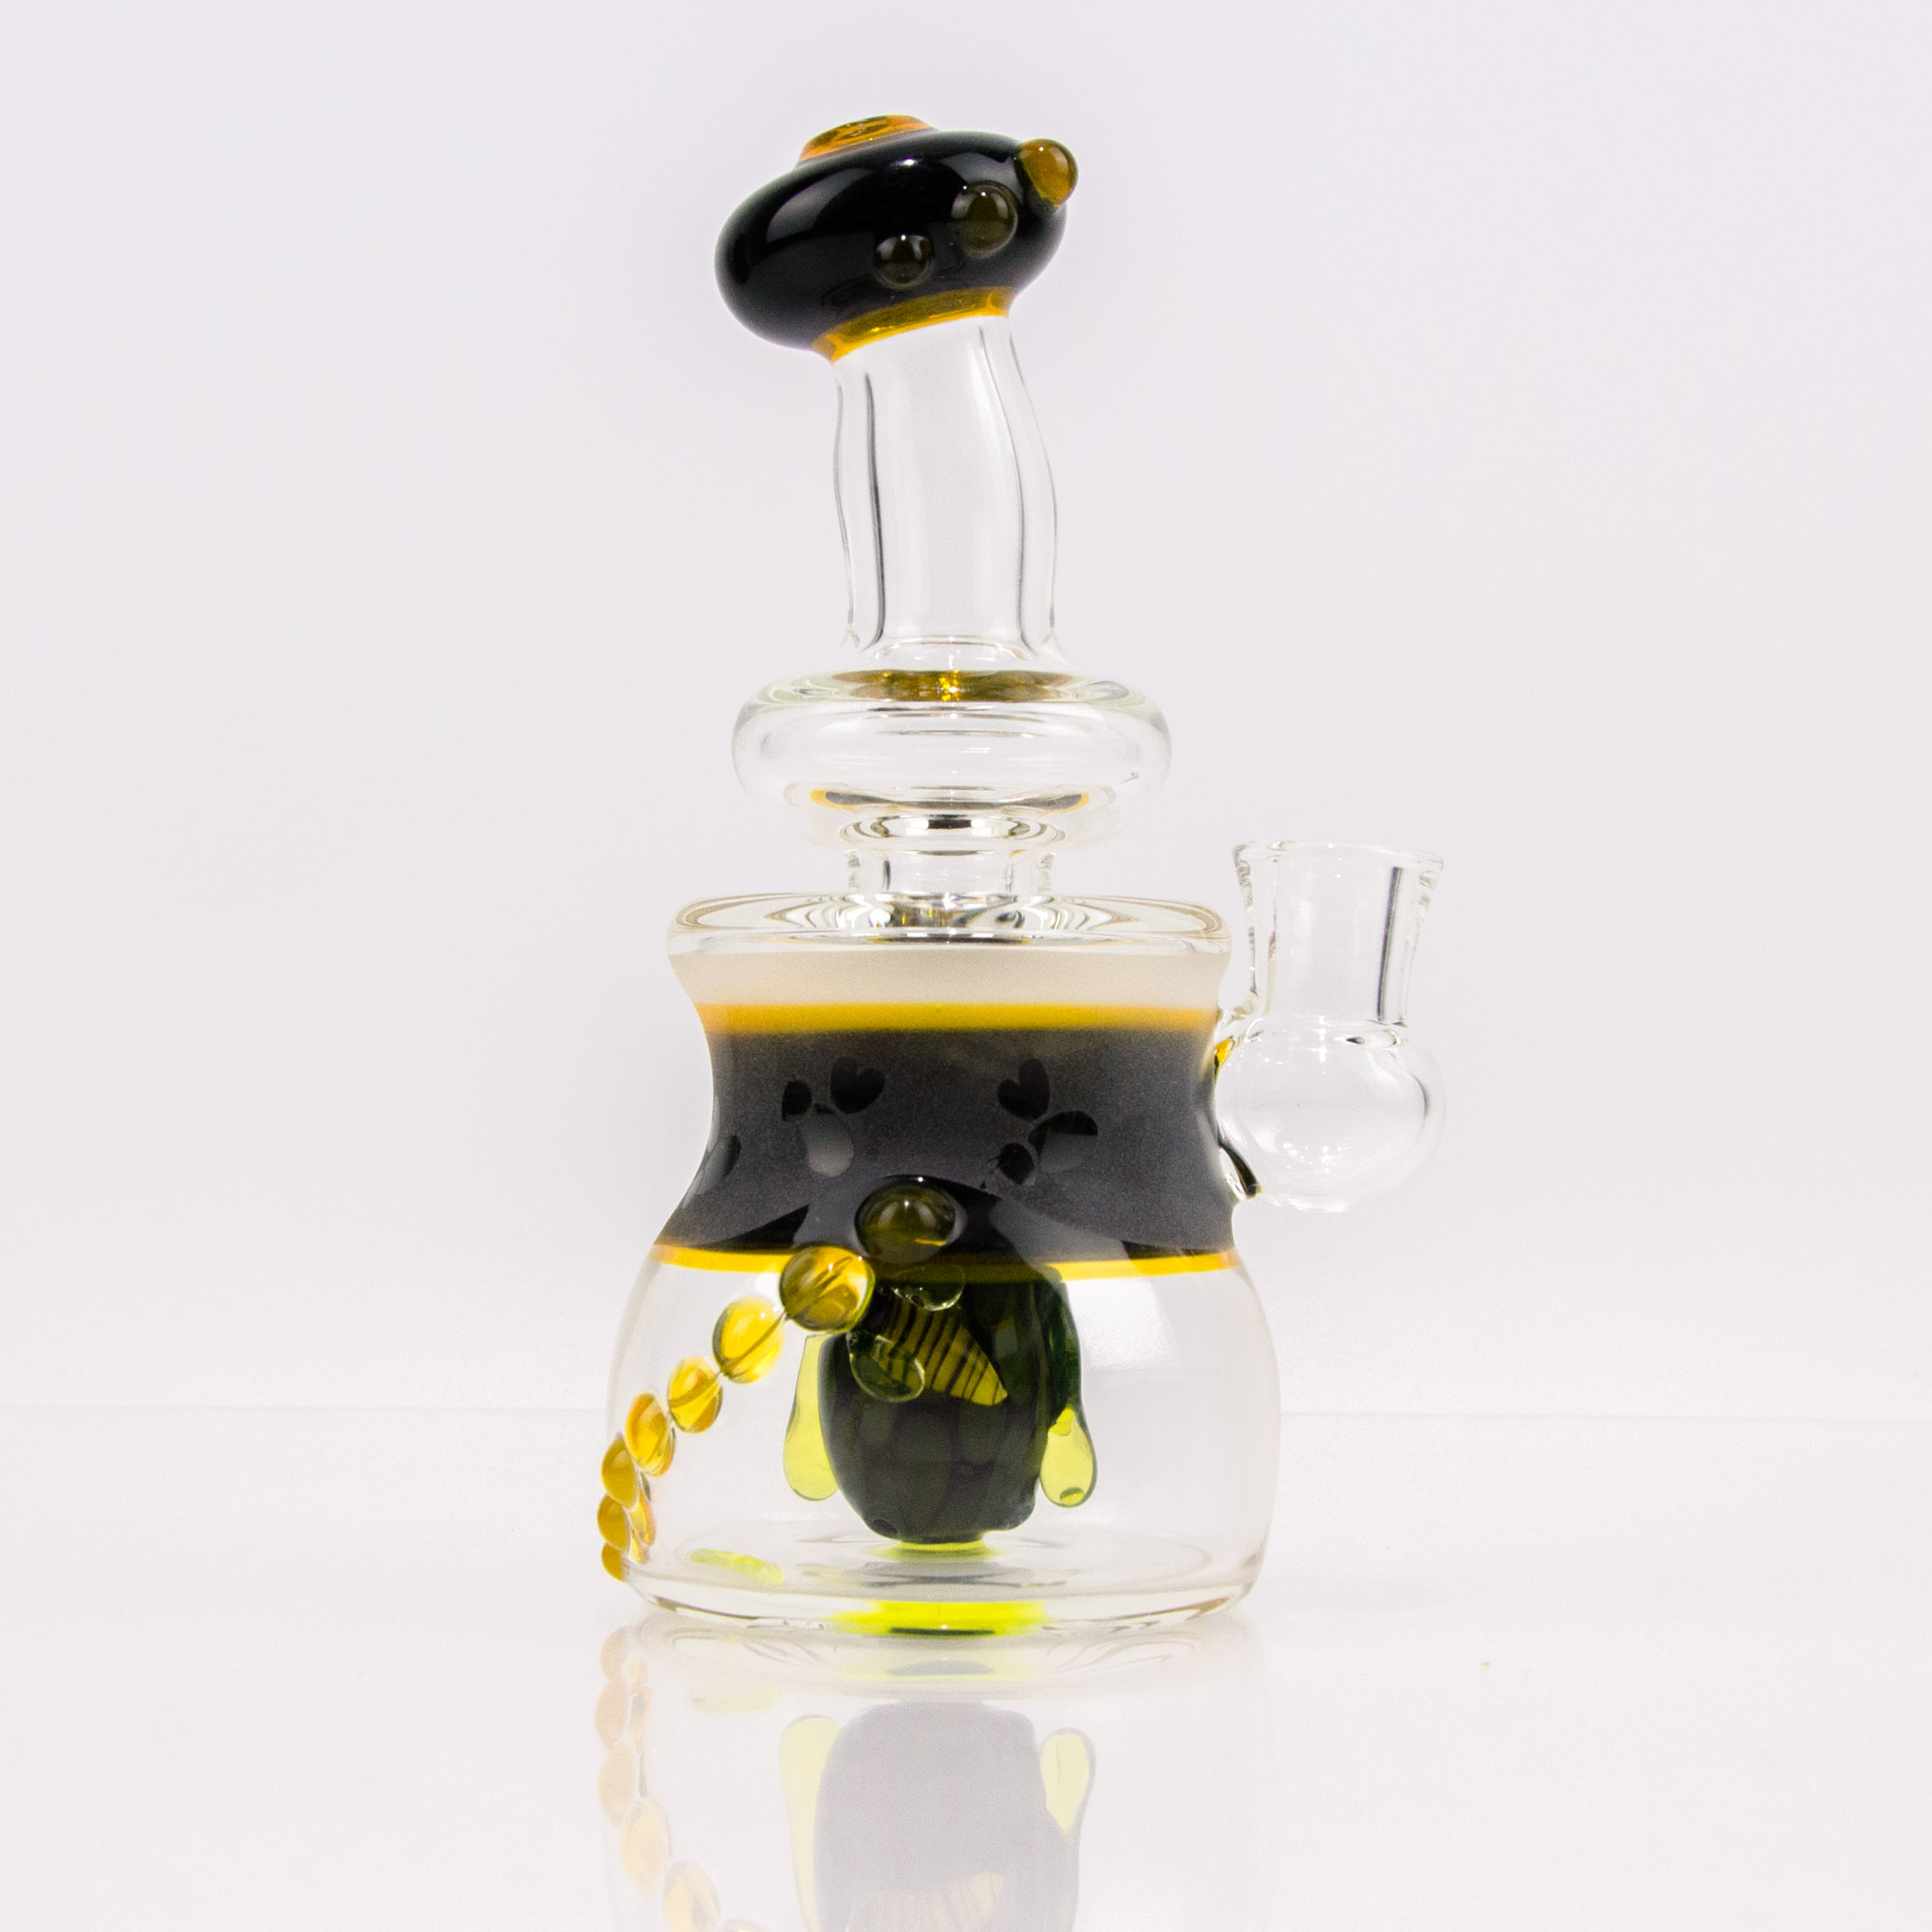 Elev8 The Bees Rig #5